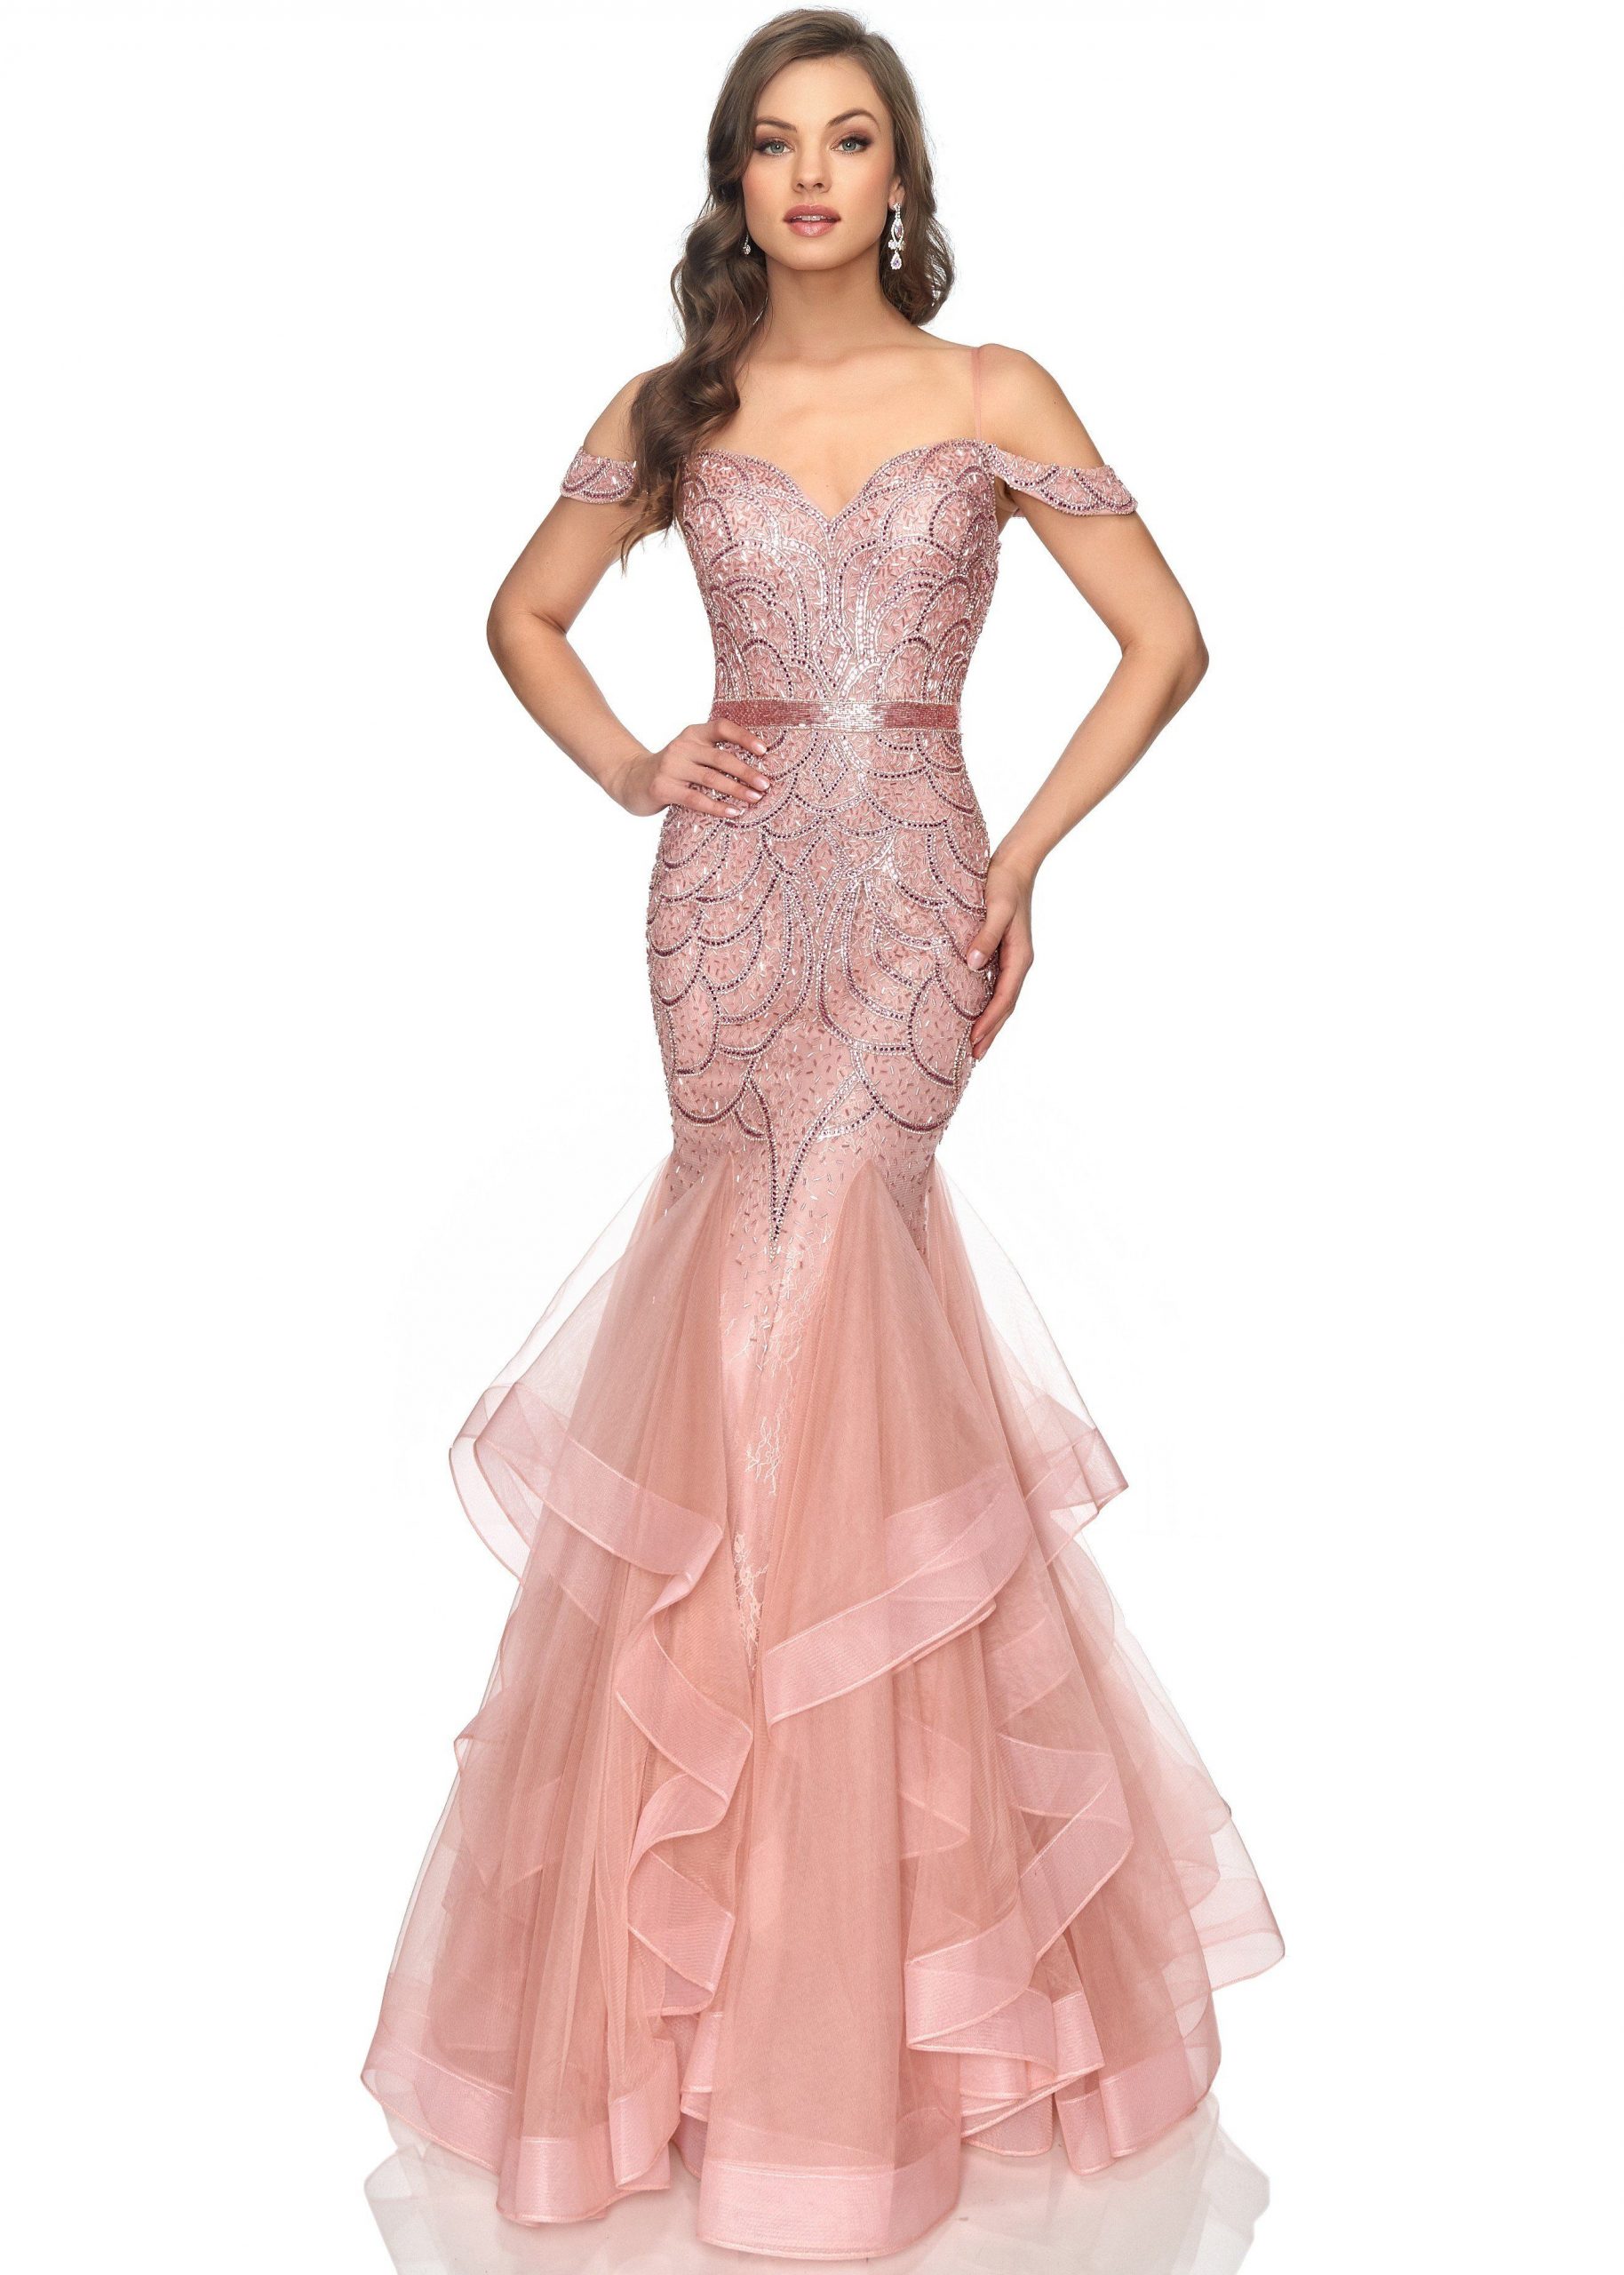 Where to Buy Pageant Dresses